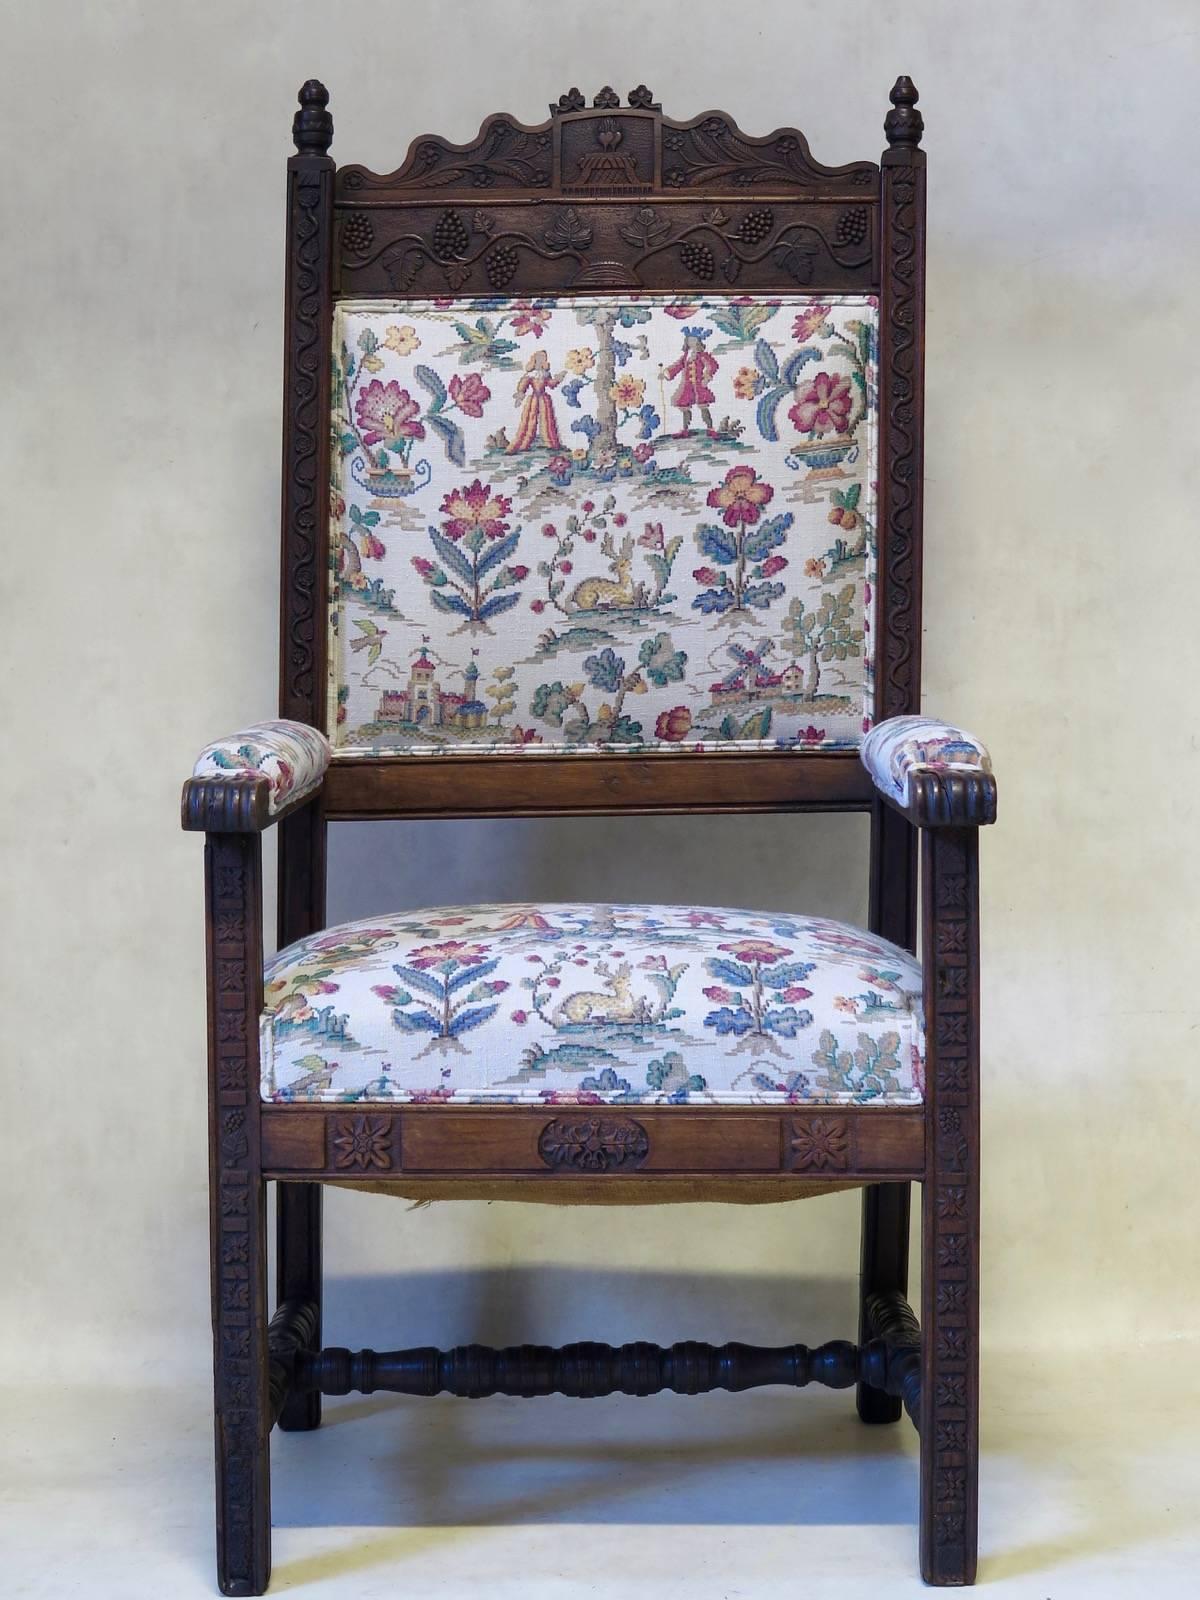 Very lovely Folk Art armchair of generous proportions. The wood (probably oak) is finely carved with an intricate decor. The crest is topped with a sacred heart symbol, and fruit and leaves of the vine. These also serpent down the front uprights.